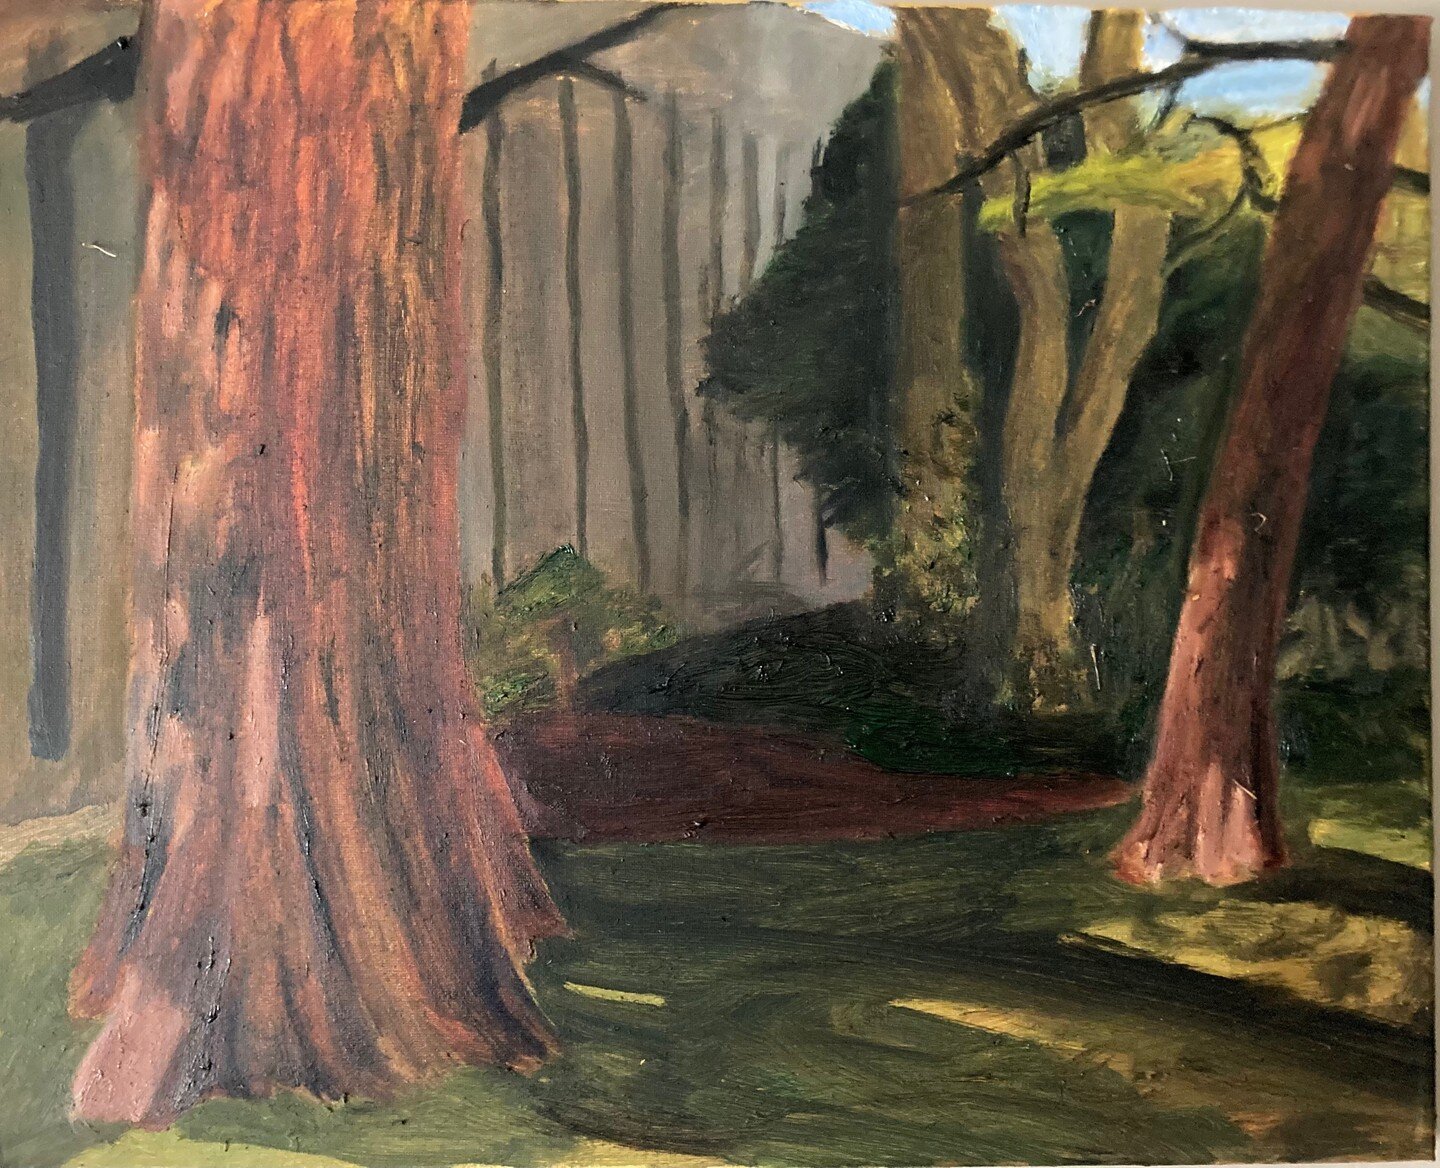 Here is a painting I did completely from obvservation en plein air. It's always nice to work from observation rather than a photograph as you get to understand the landscape better. A challenge was the lighting constantly changing. 
These past two mo